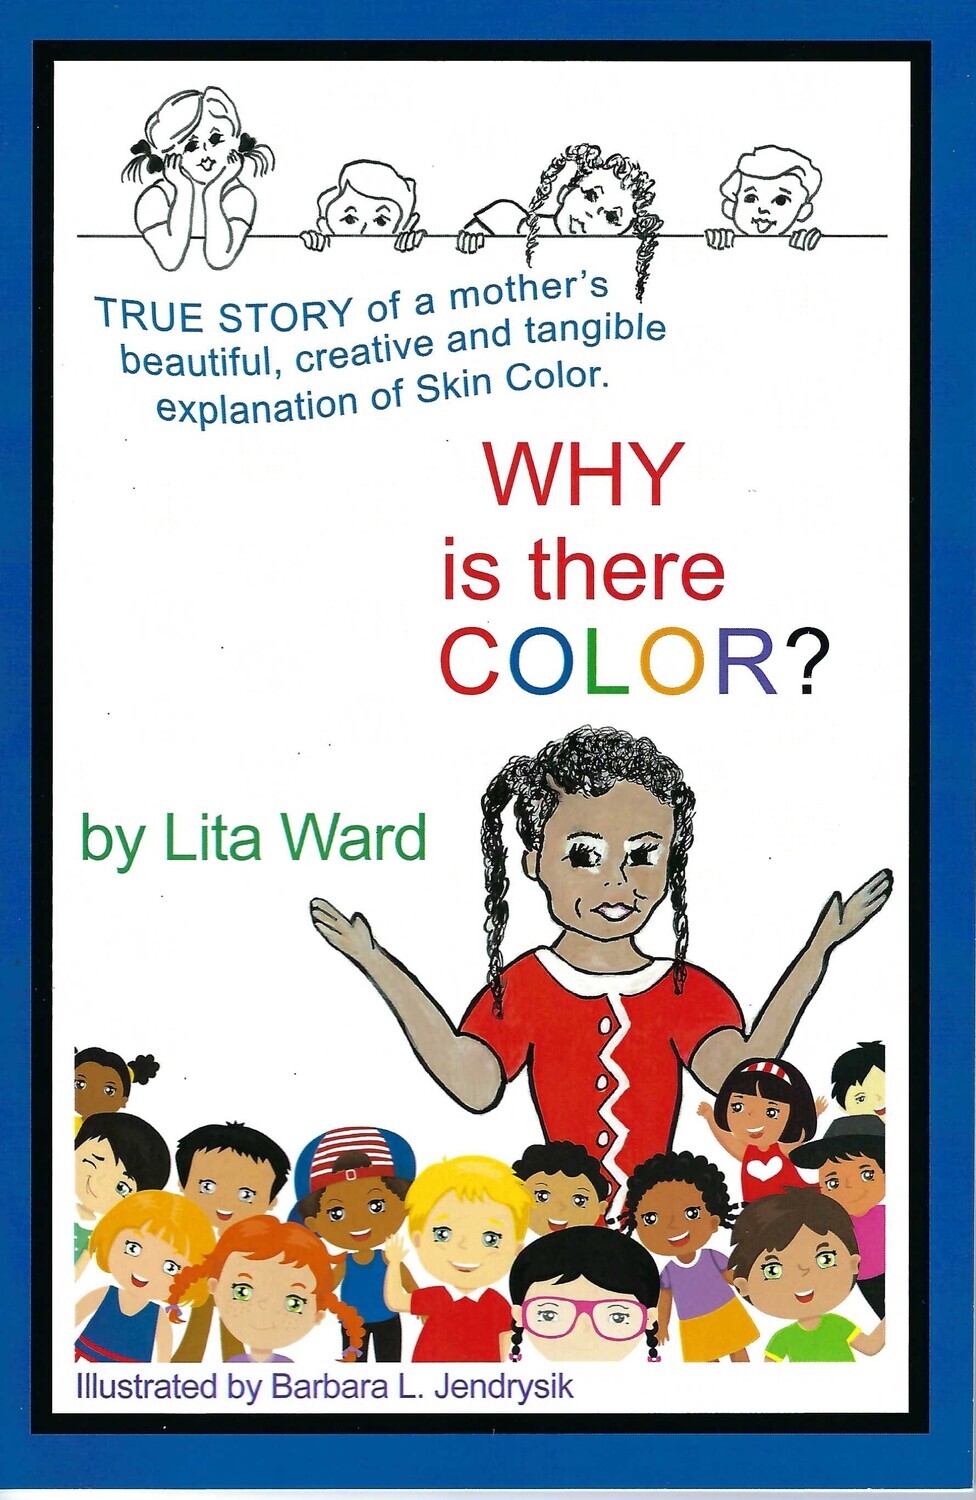 Why is there COLOR? By Lita Ward